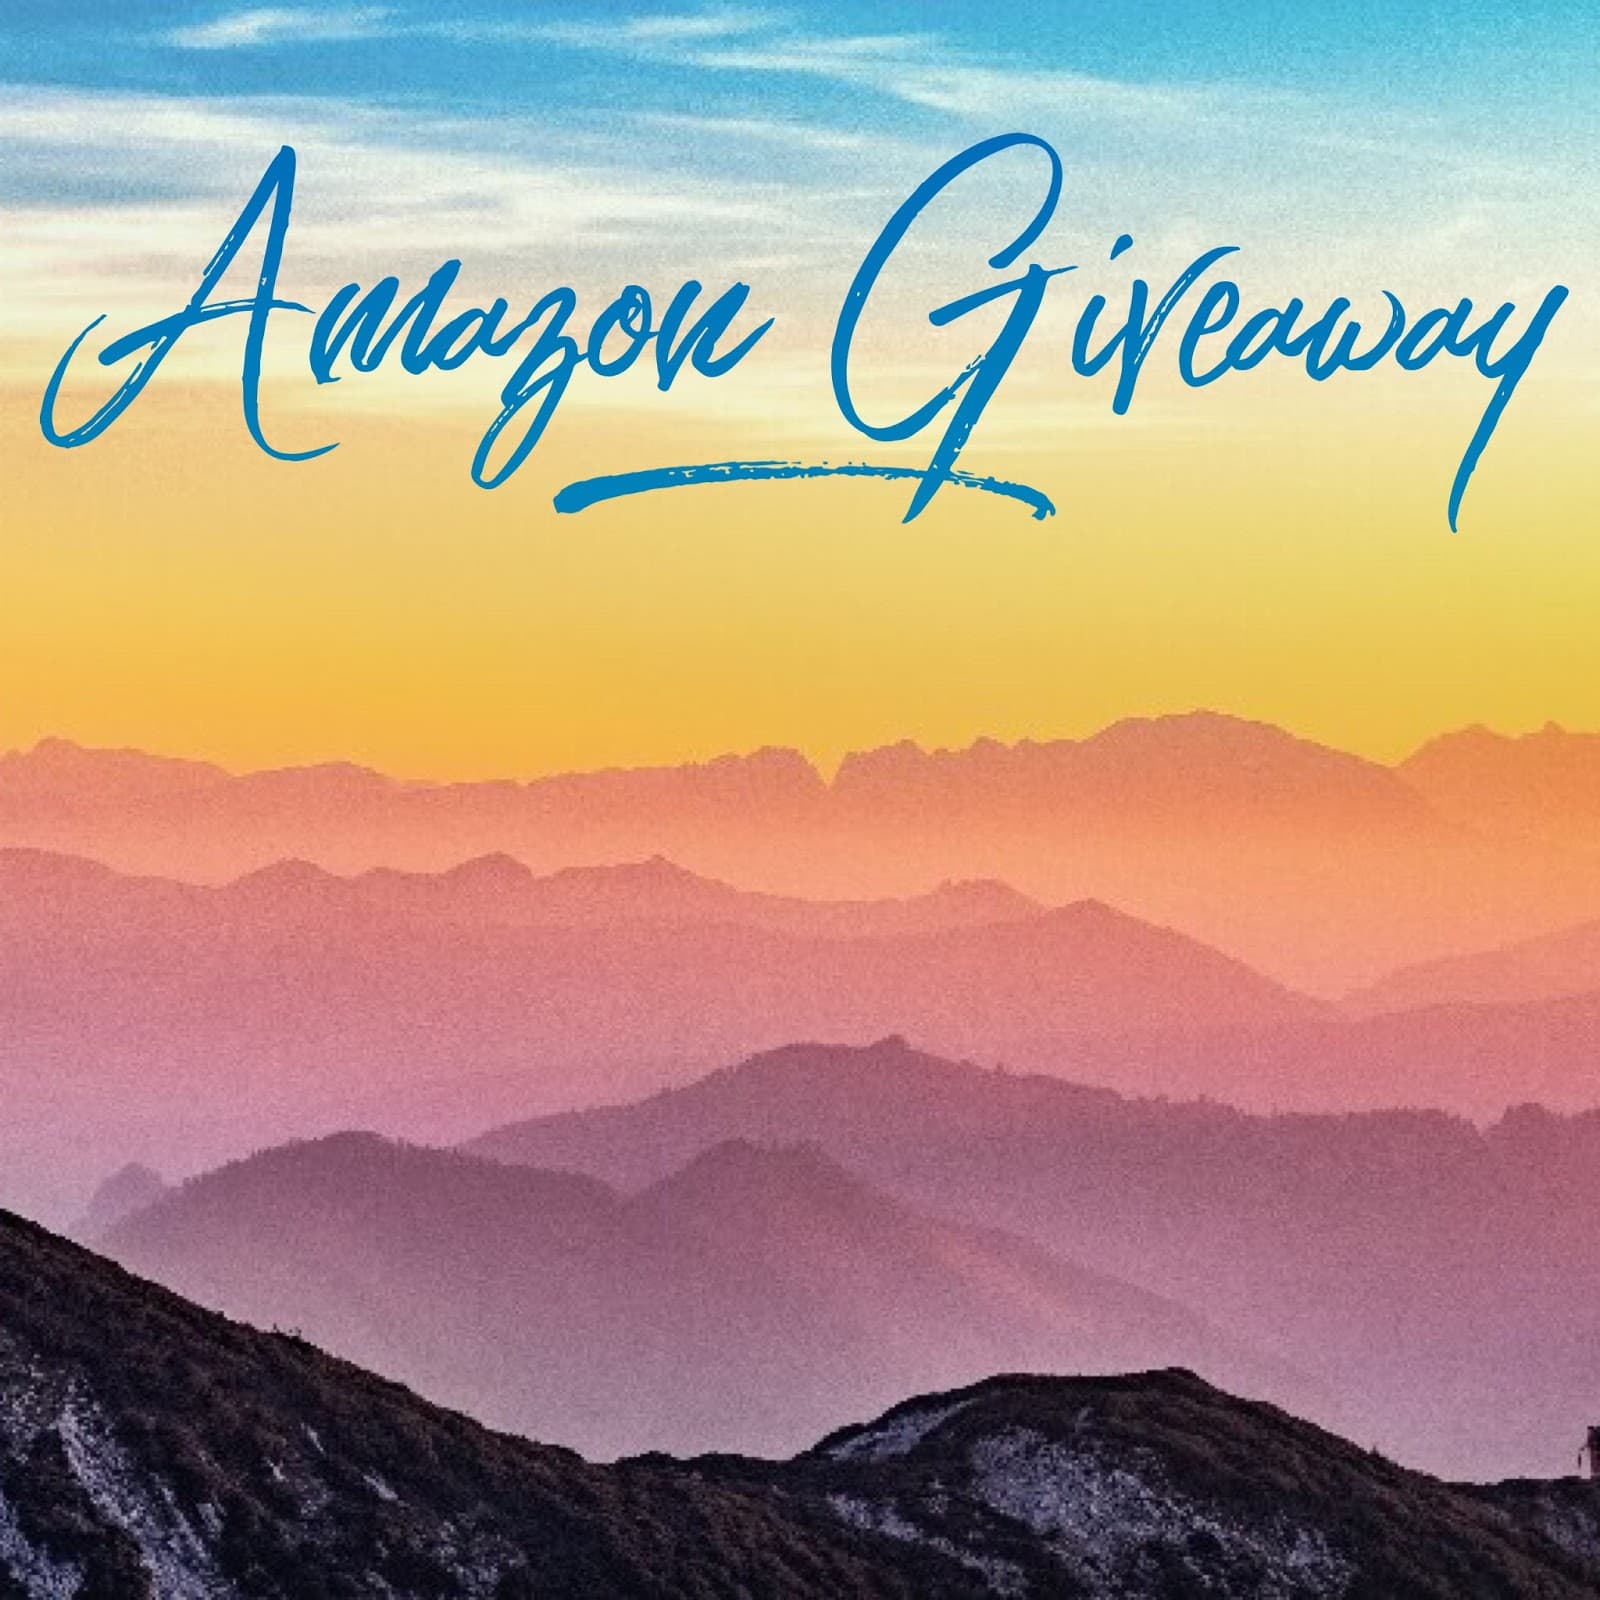 March Amazon Giveaway ends April 27, 2018